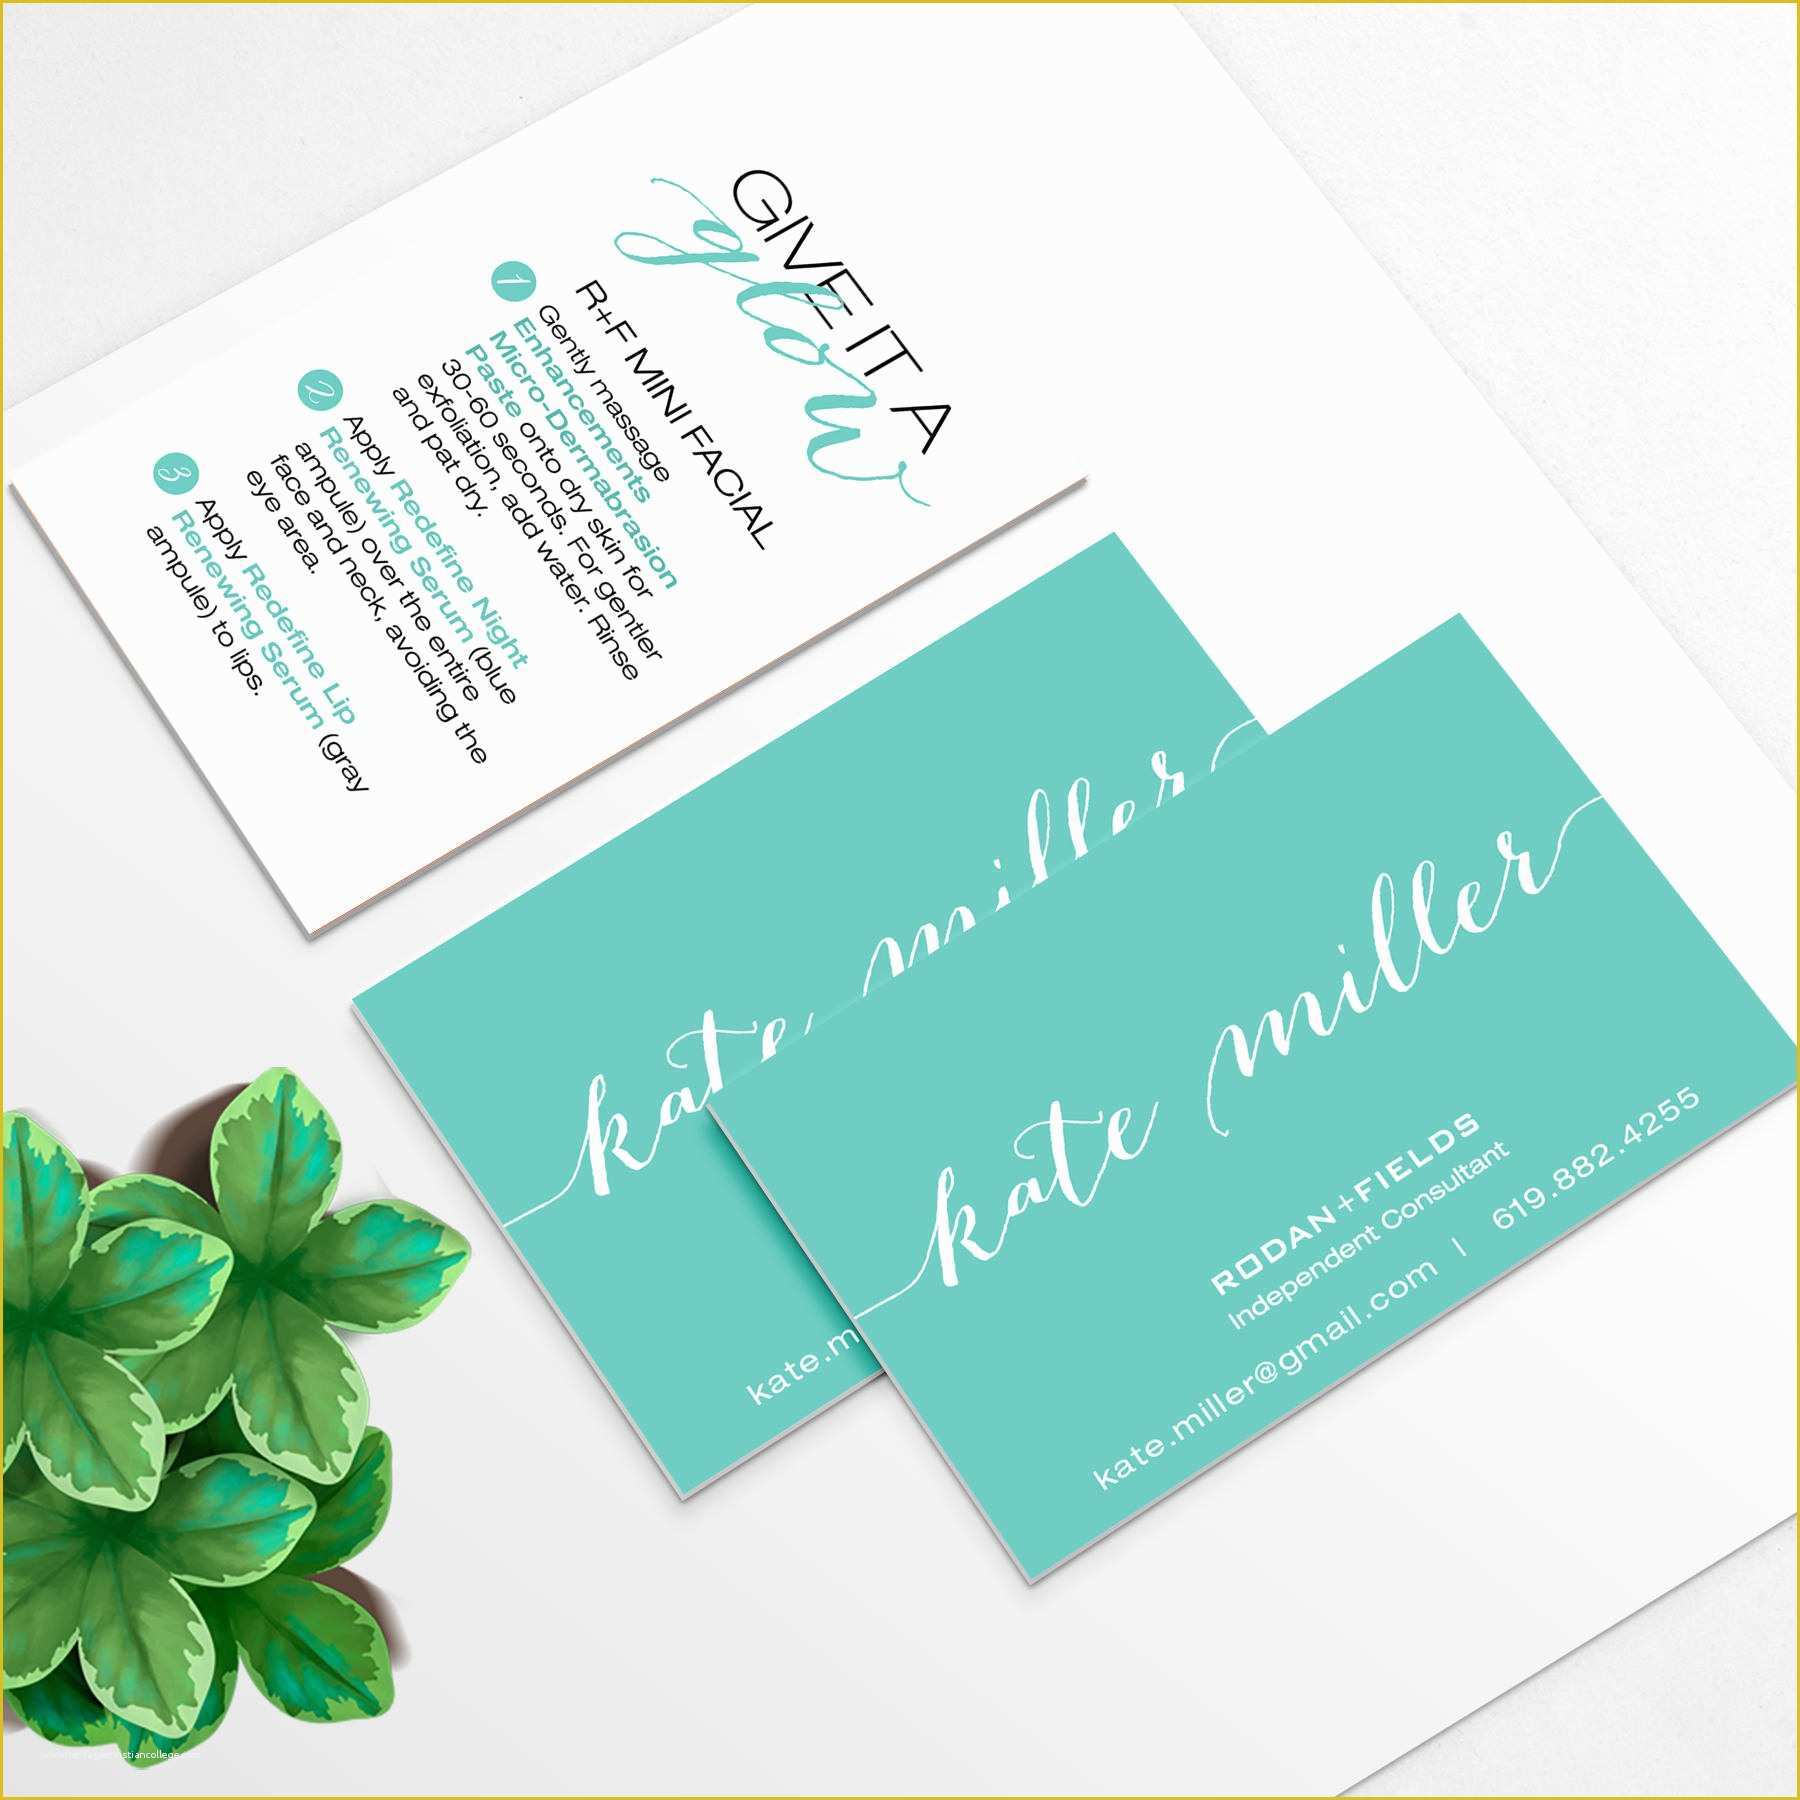 Rodan and Fields Business Card Template Free Of Rodan and Fields Business Card and Mini Facial Instruction